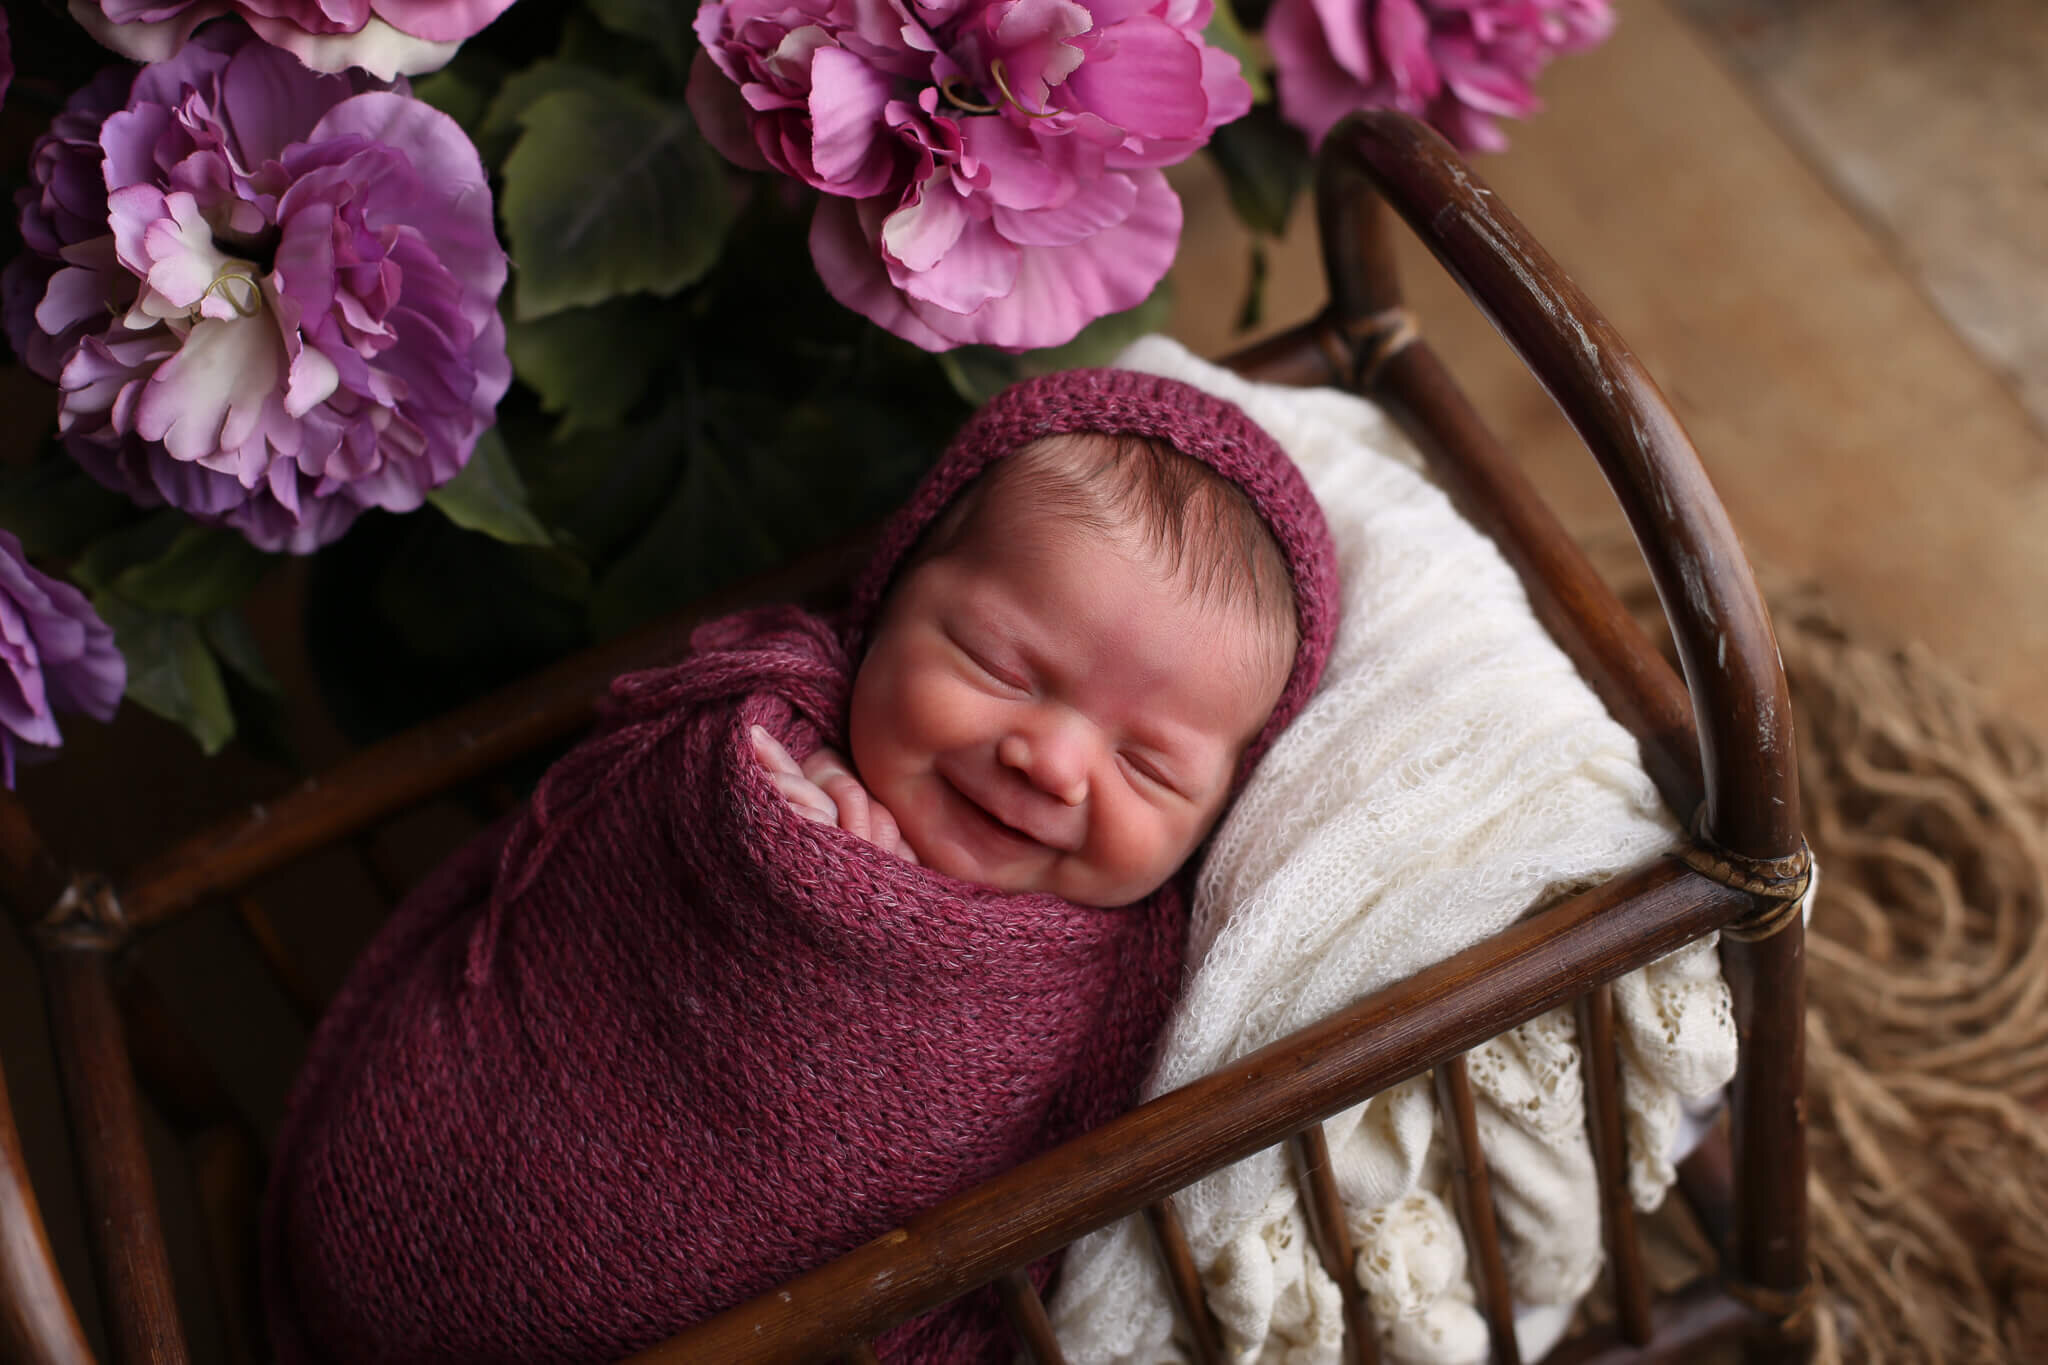  A picture of a smiling newborn baby, wrapped tight in a blanket that rests in a wooden cradle as it sleeps from a baby photo session 